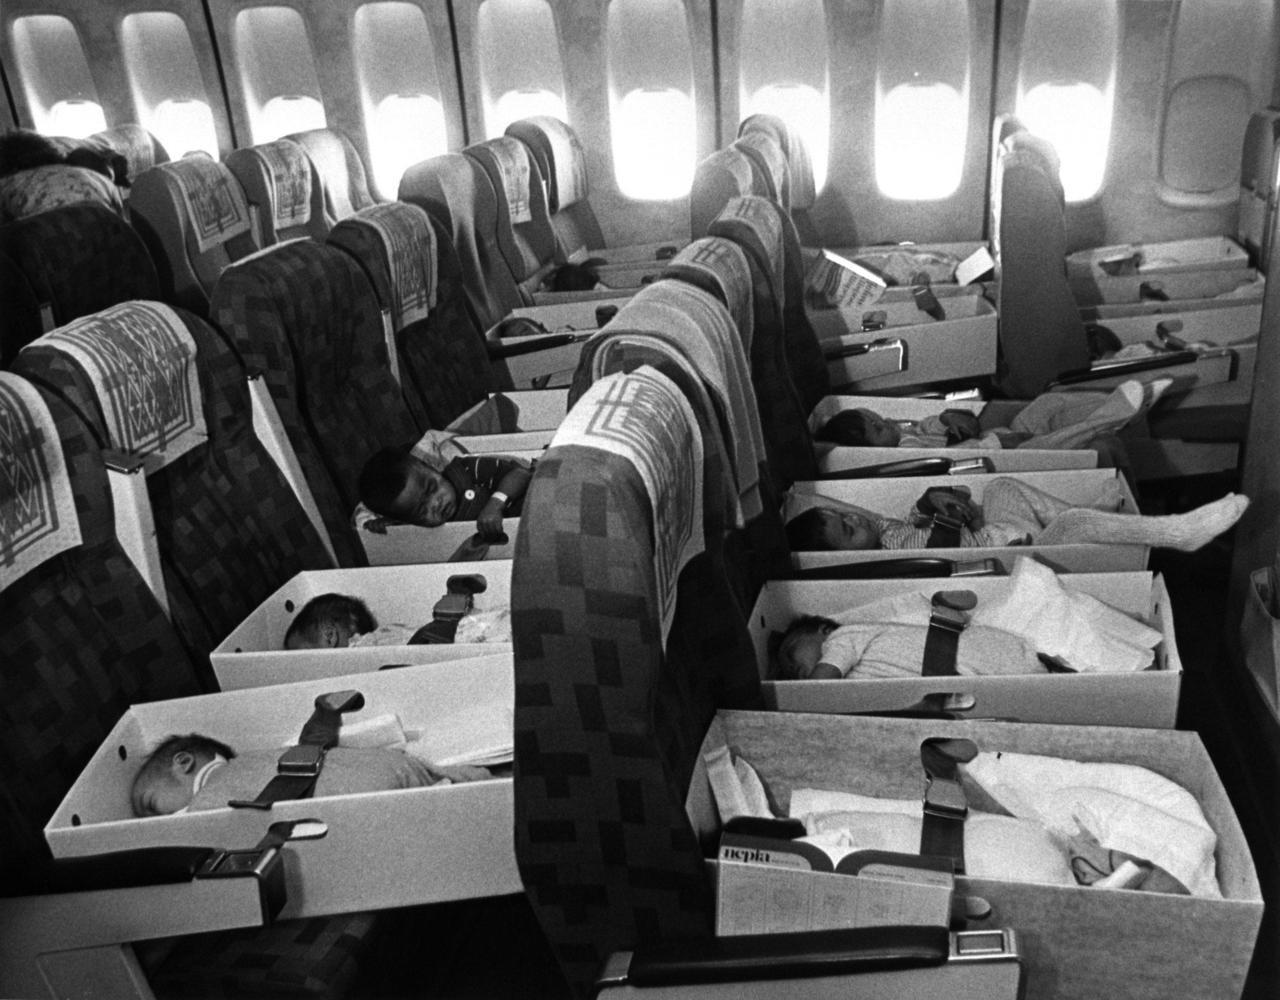  Old photo of a plane with little babies, evacuated from Vietnam